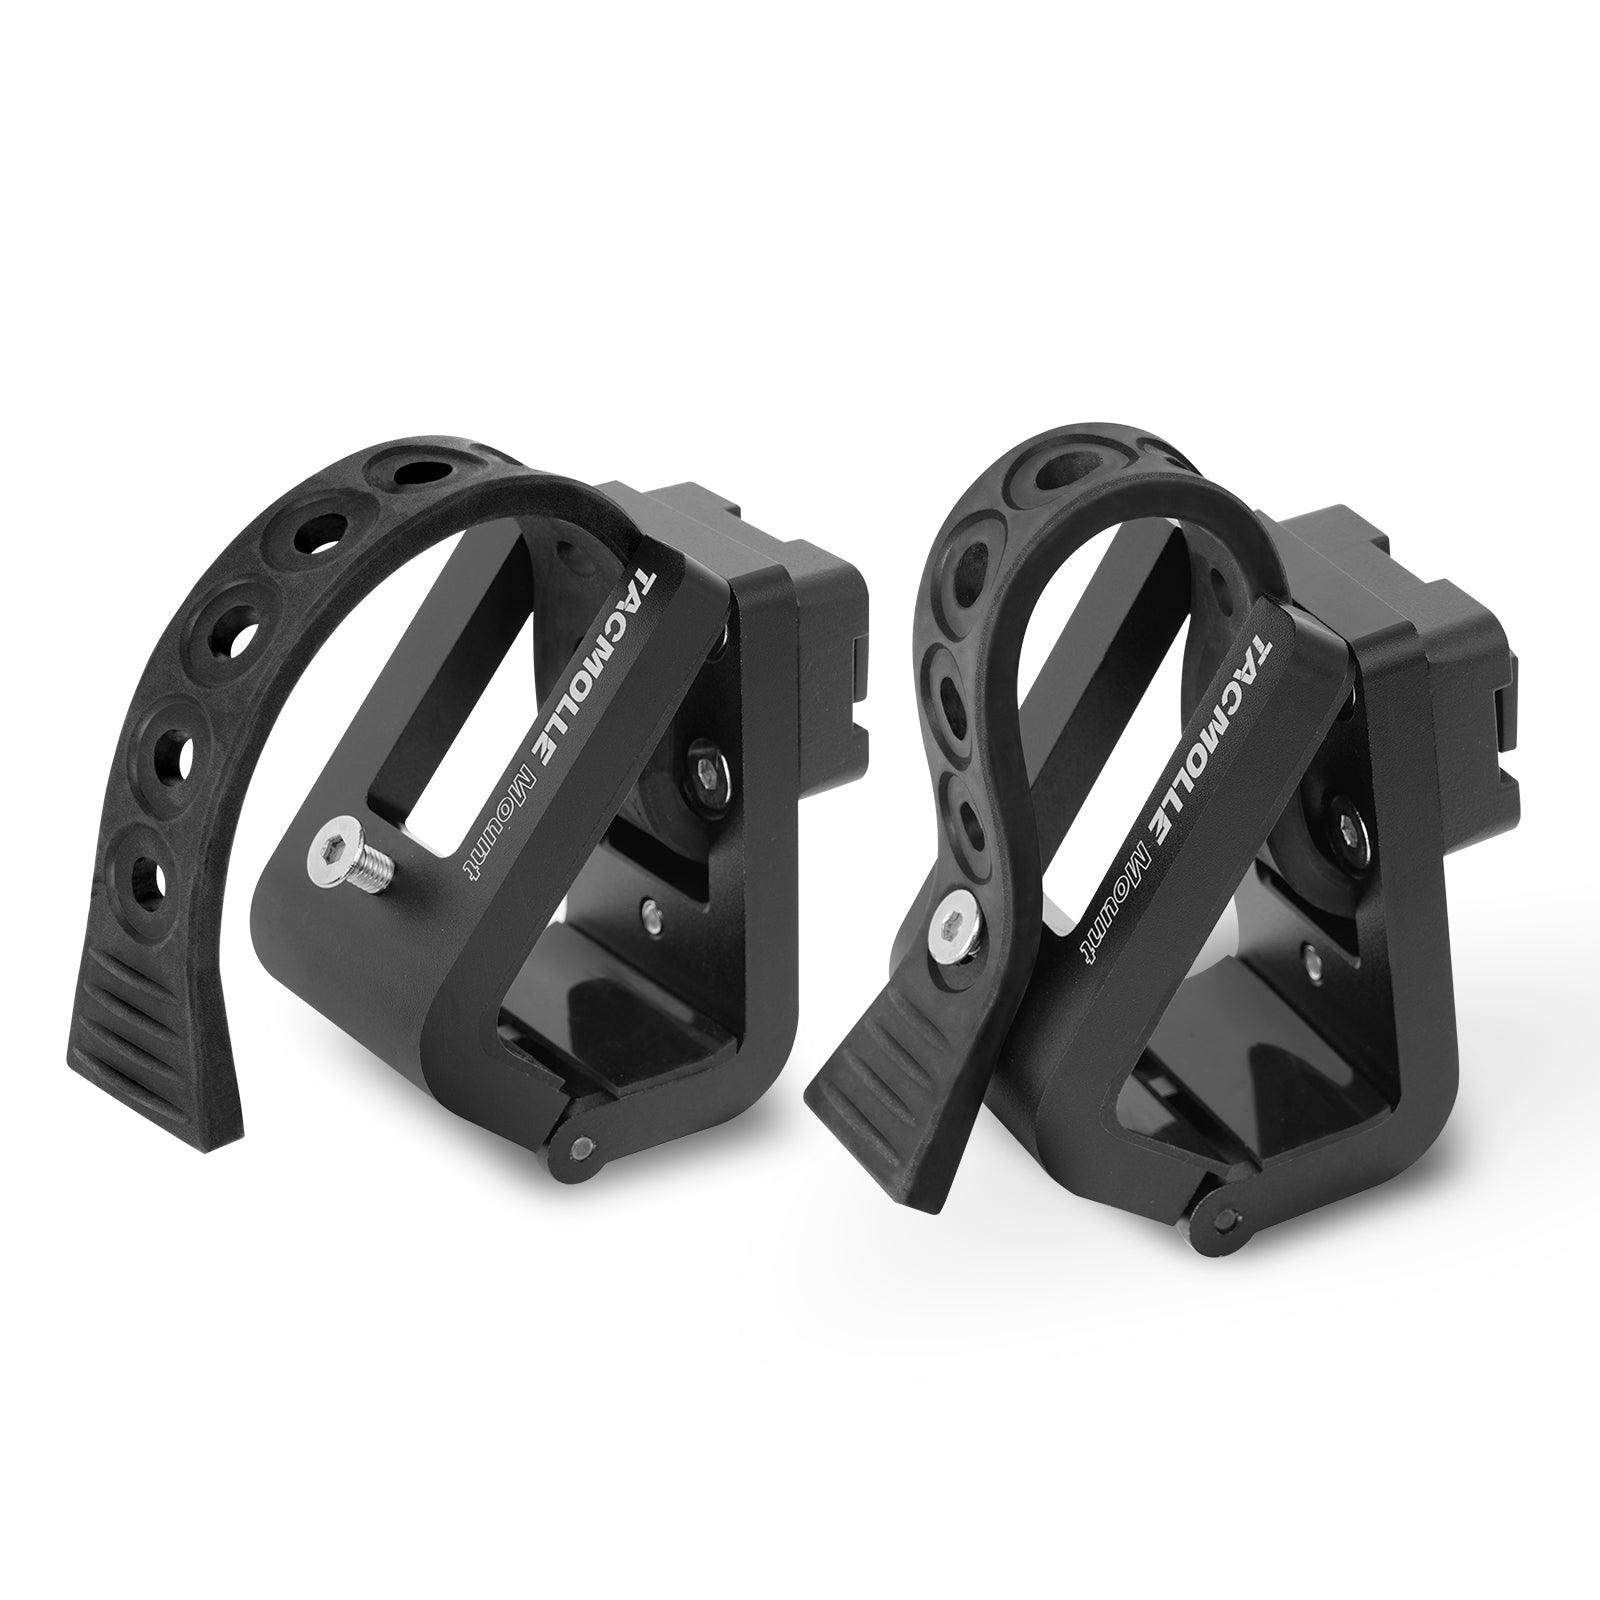 TACMOLLE Gun Rack for Tactical Rigid MOLLE Panel, 2-Pack - TACMOLLE